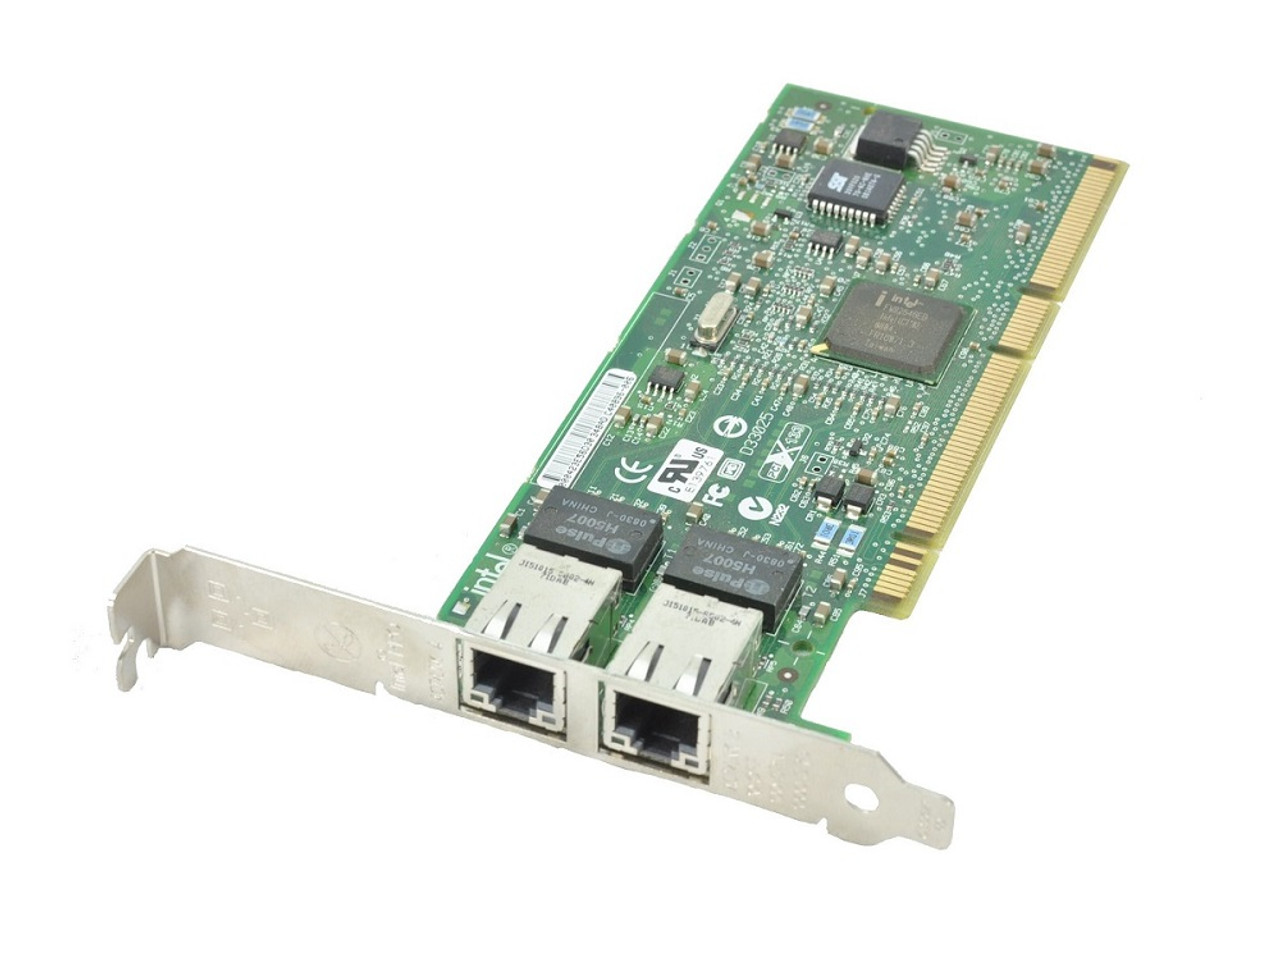 X540T2-DELL - Dell Ethernet Converged Network Adapter X540-T2